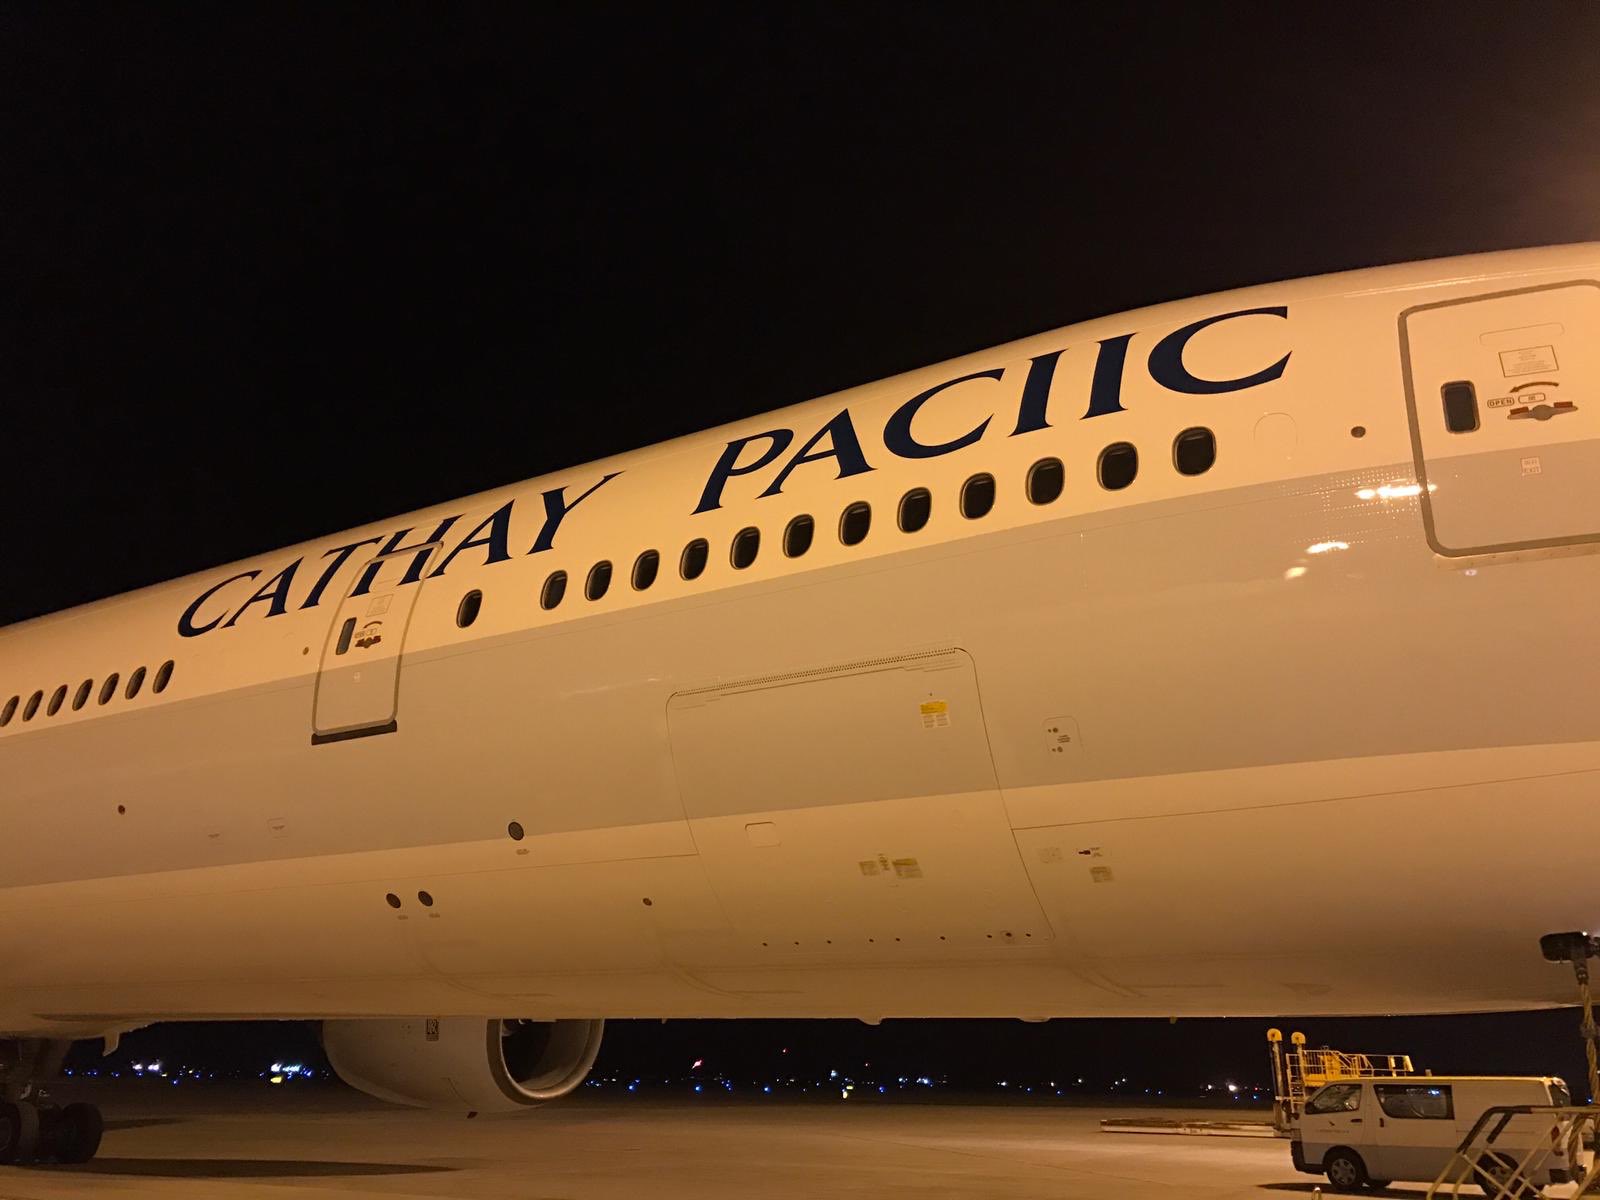 201809/cathay-pacific-1.jpg